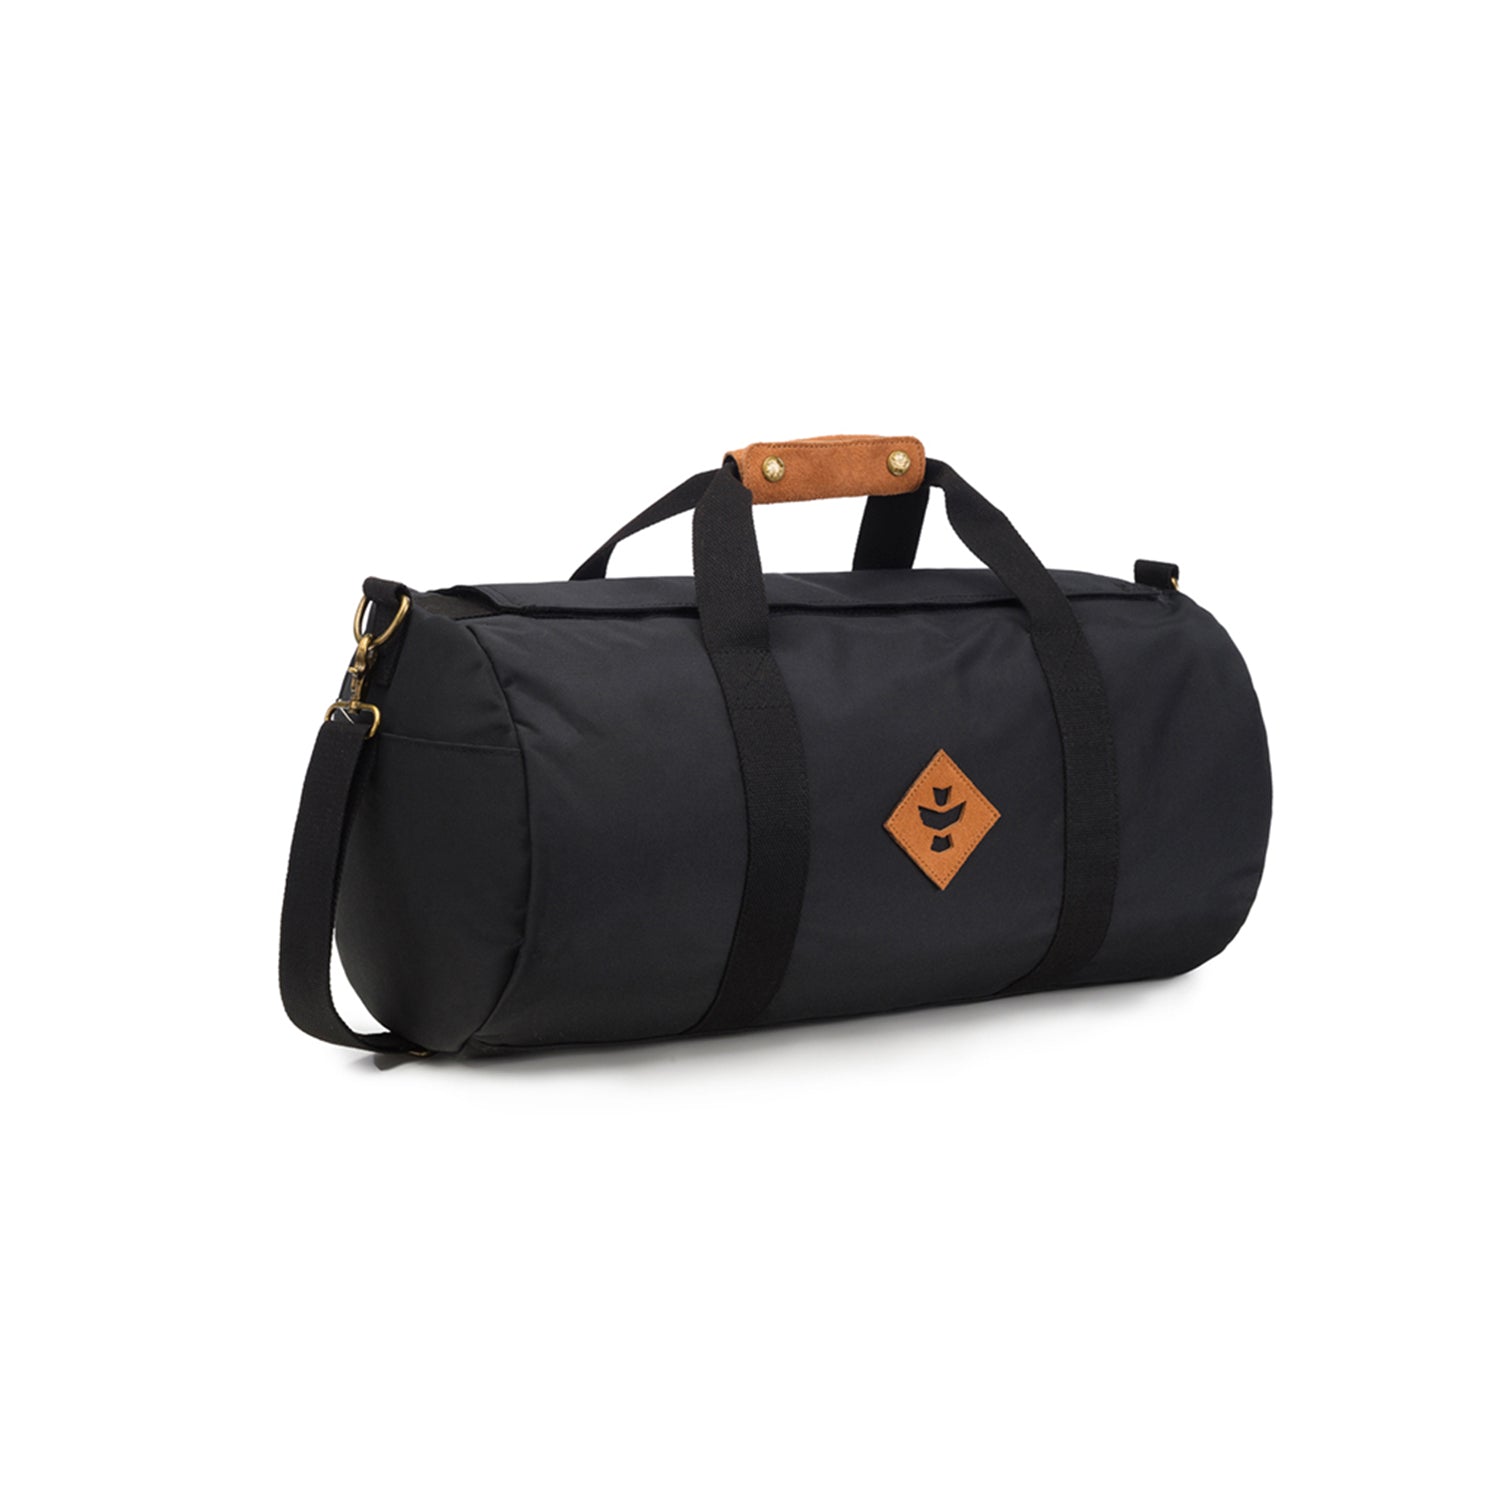 Revelry Overnighter - Smell Proof Small Duffle